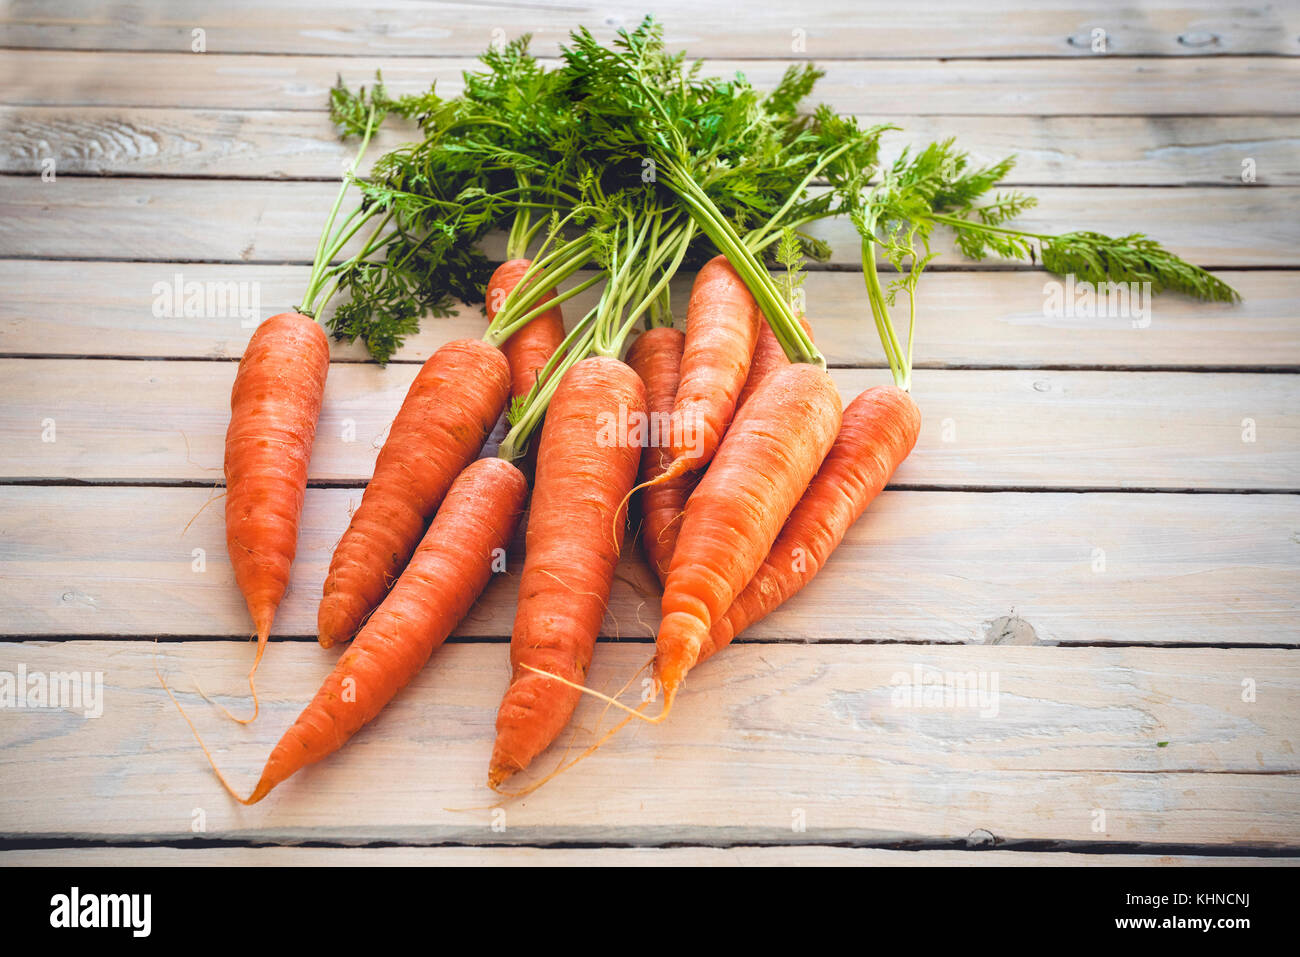 Raw carrots with green plants on a wooden table Stock Photo